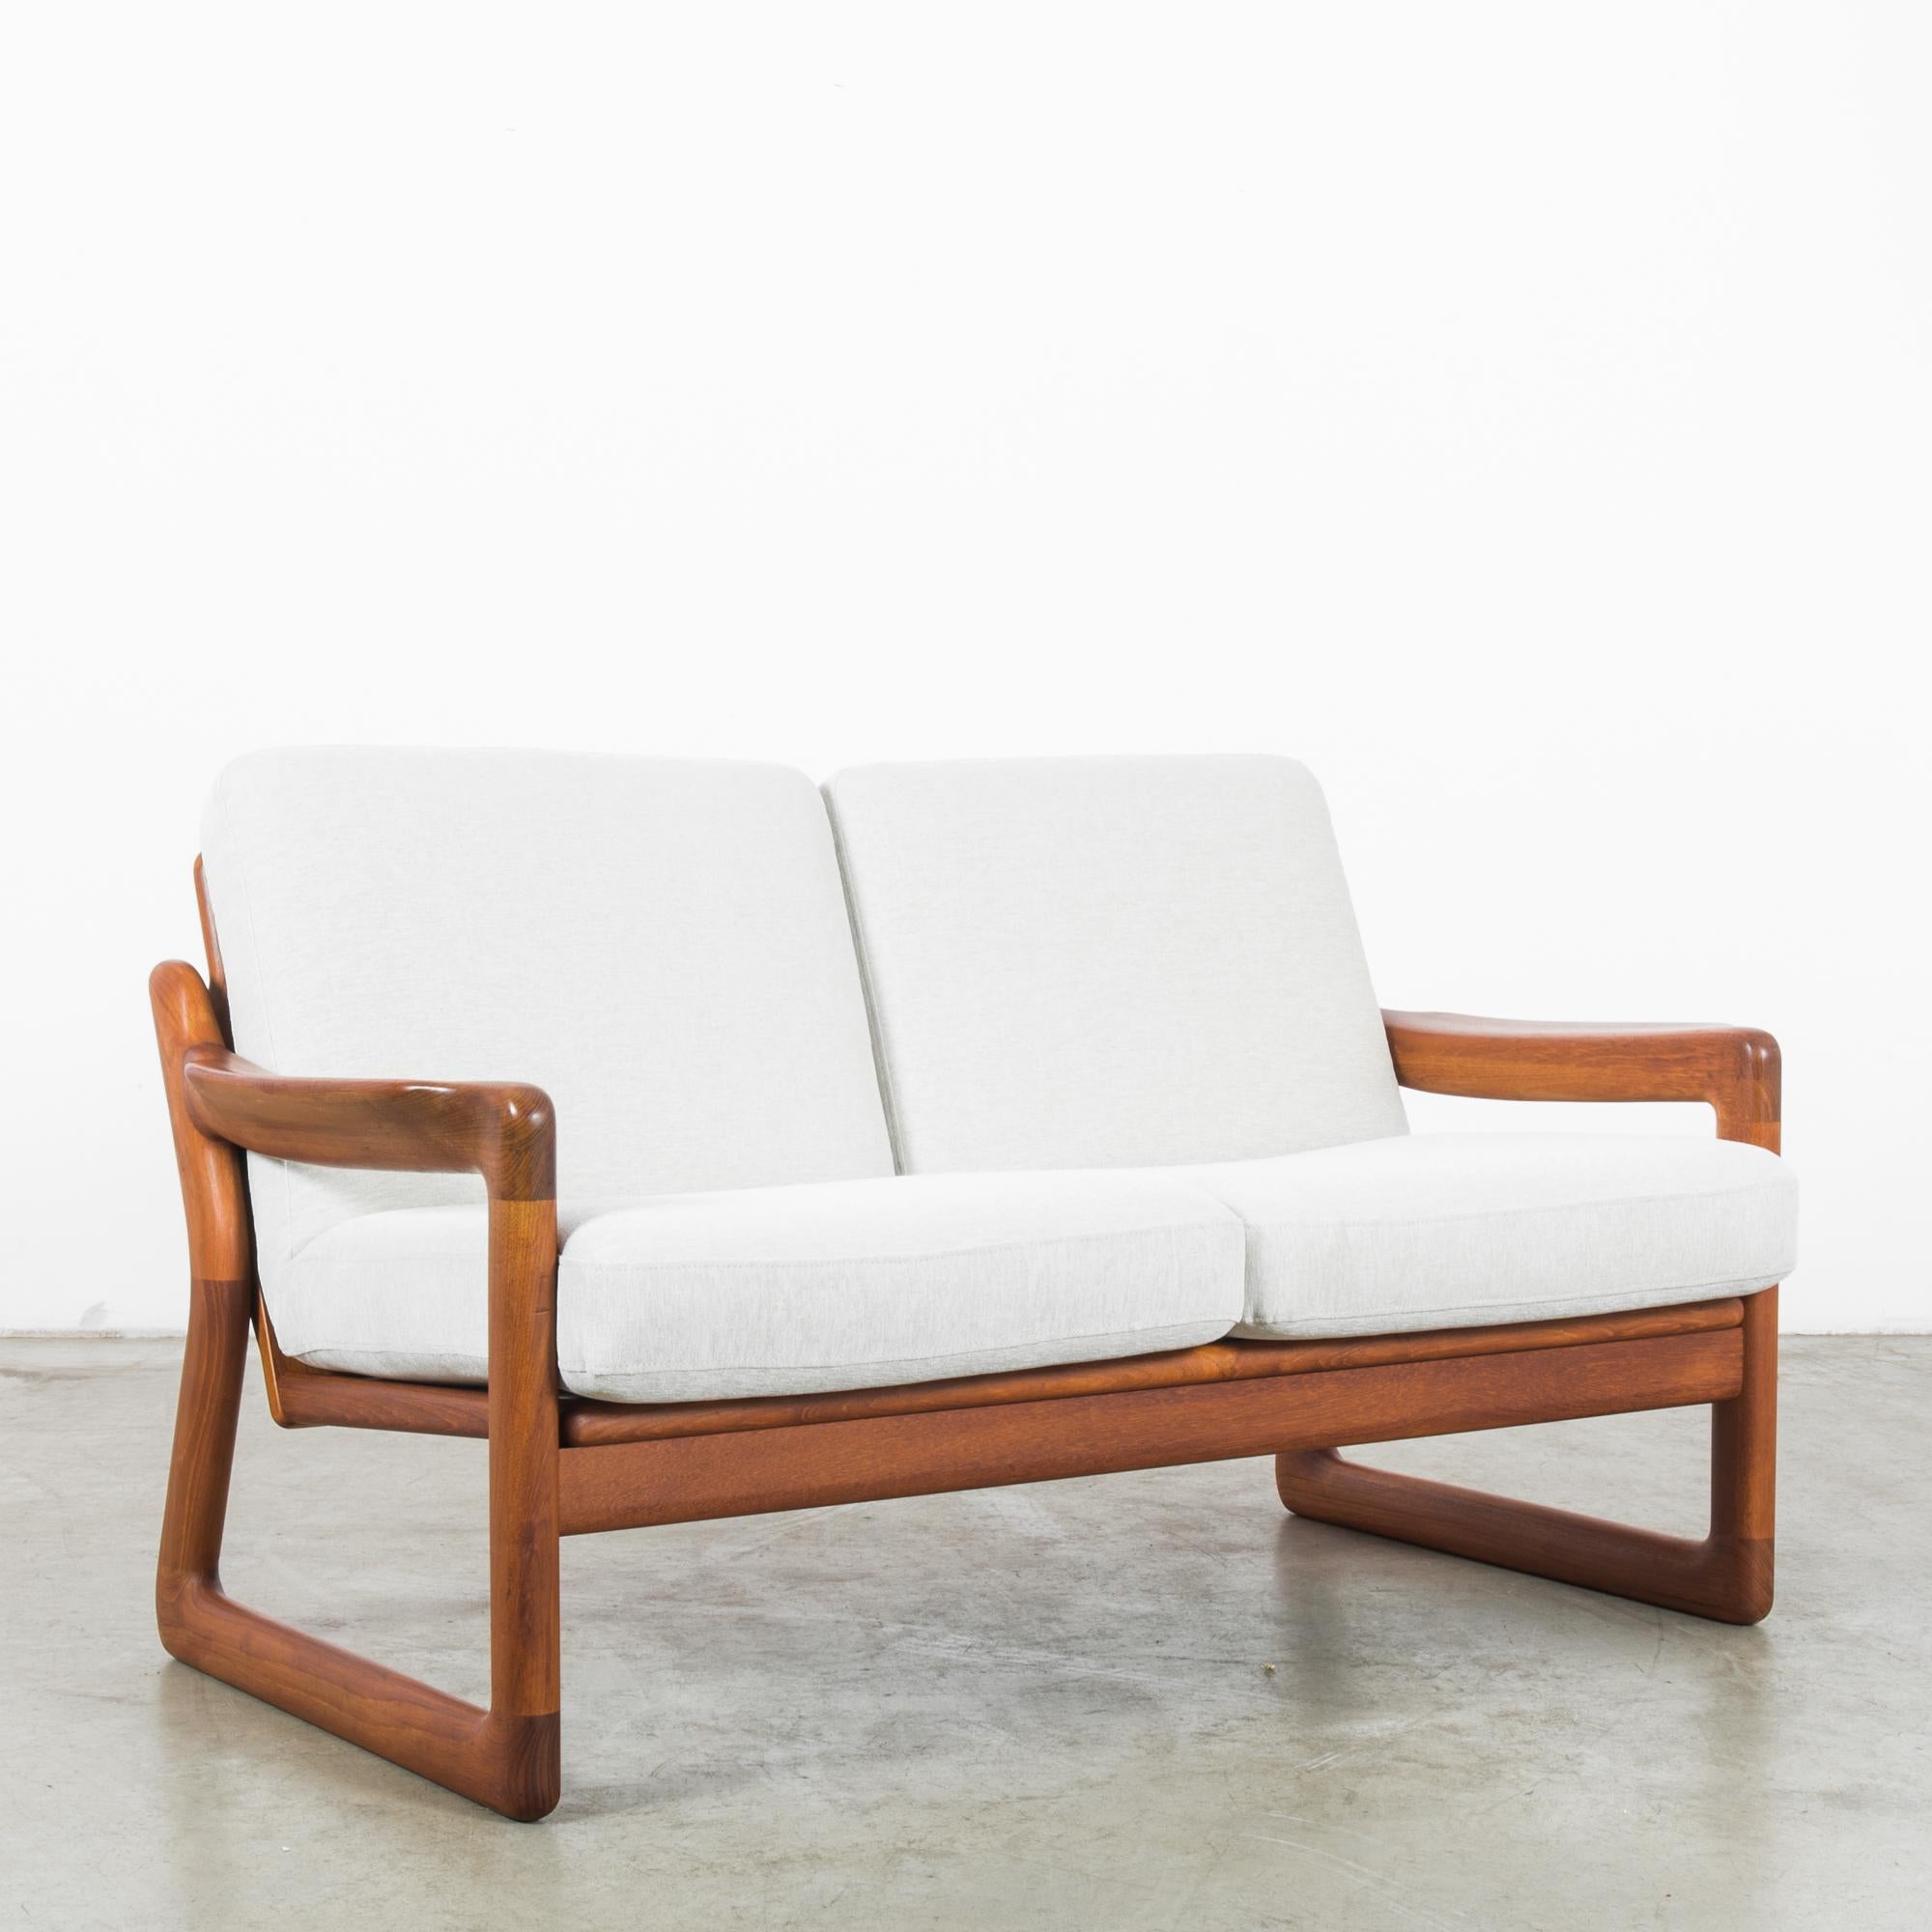 Embrace timeless comfort and mid-century charm with this 1960s Danish retro teak sofa. Crafted during a time when attention to detail and quality was paramount, this piece embodies the sleek, minimalist aesthetic that has become synonymous with